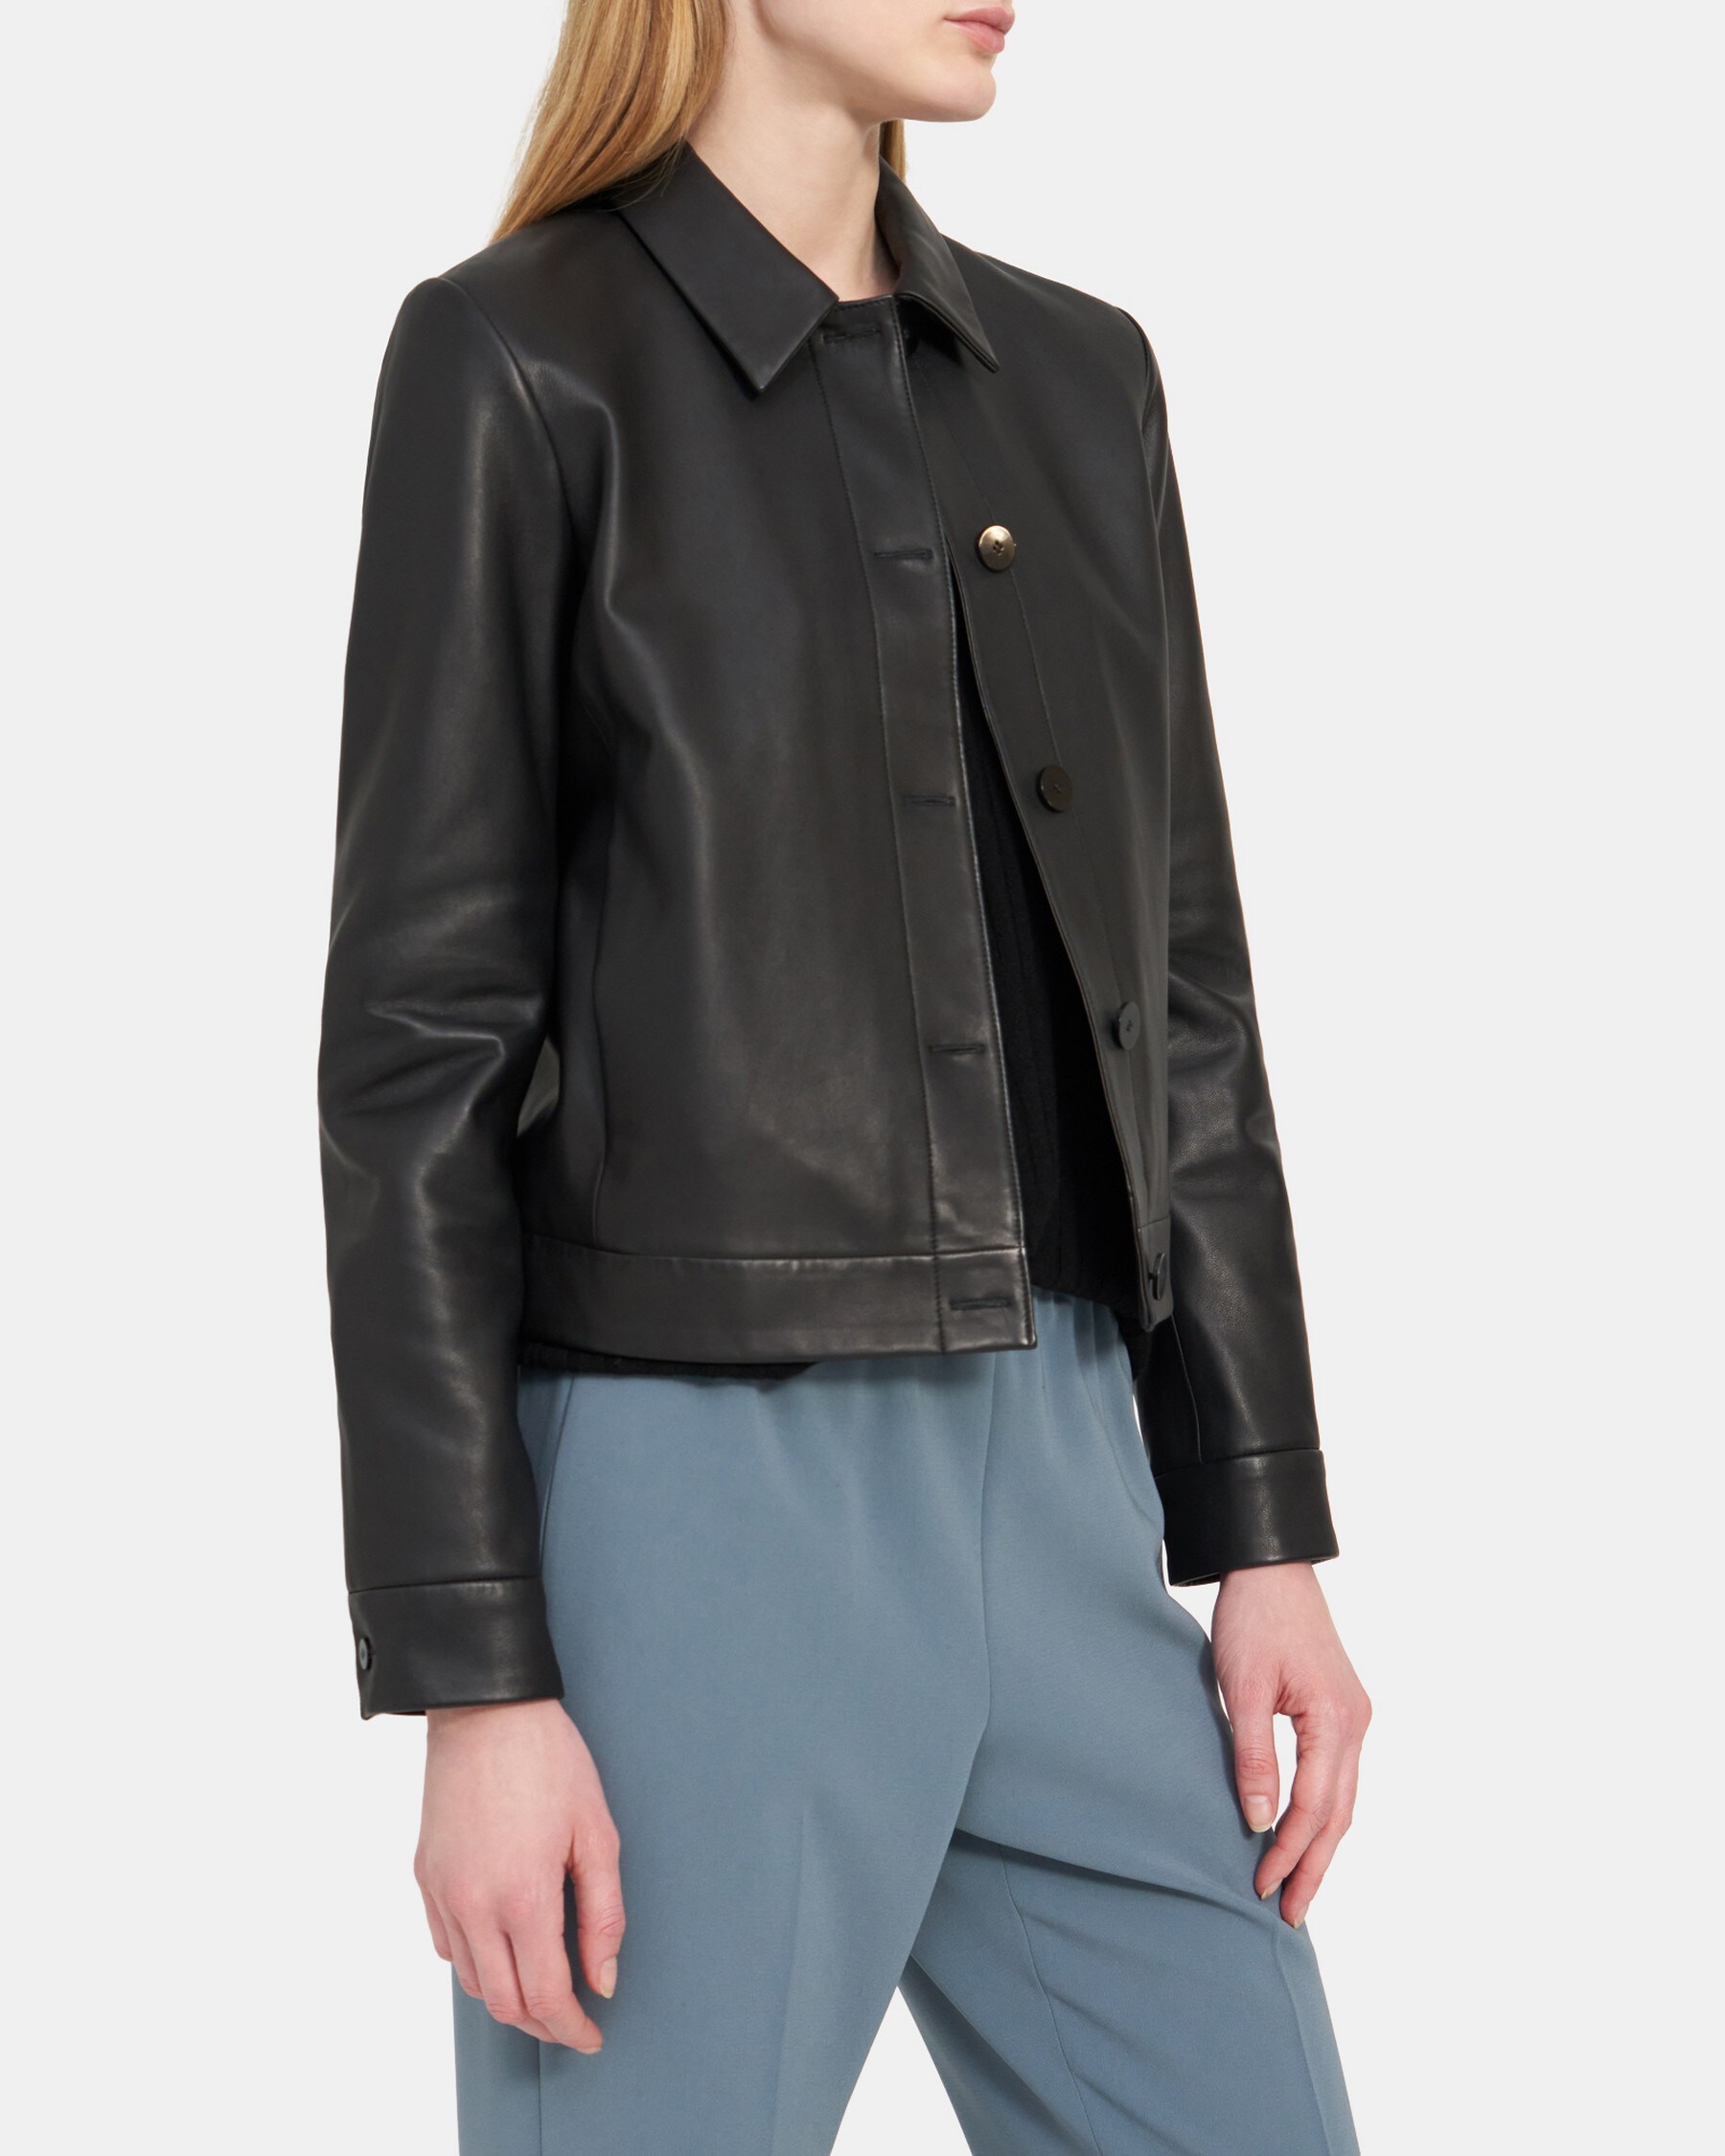 LEATHER CROP JKT | Theory Outlet